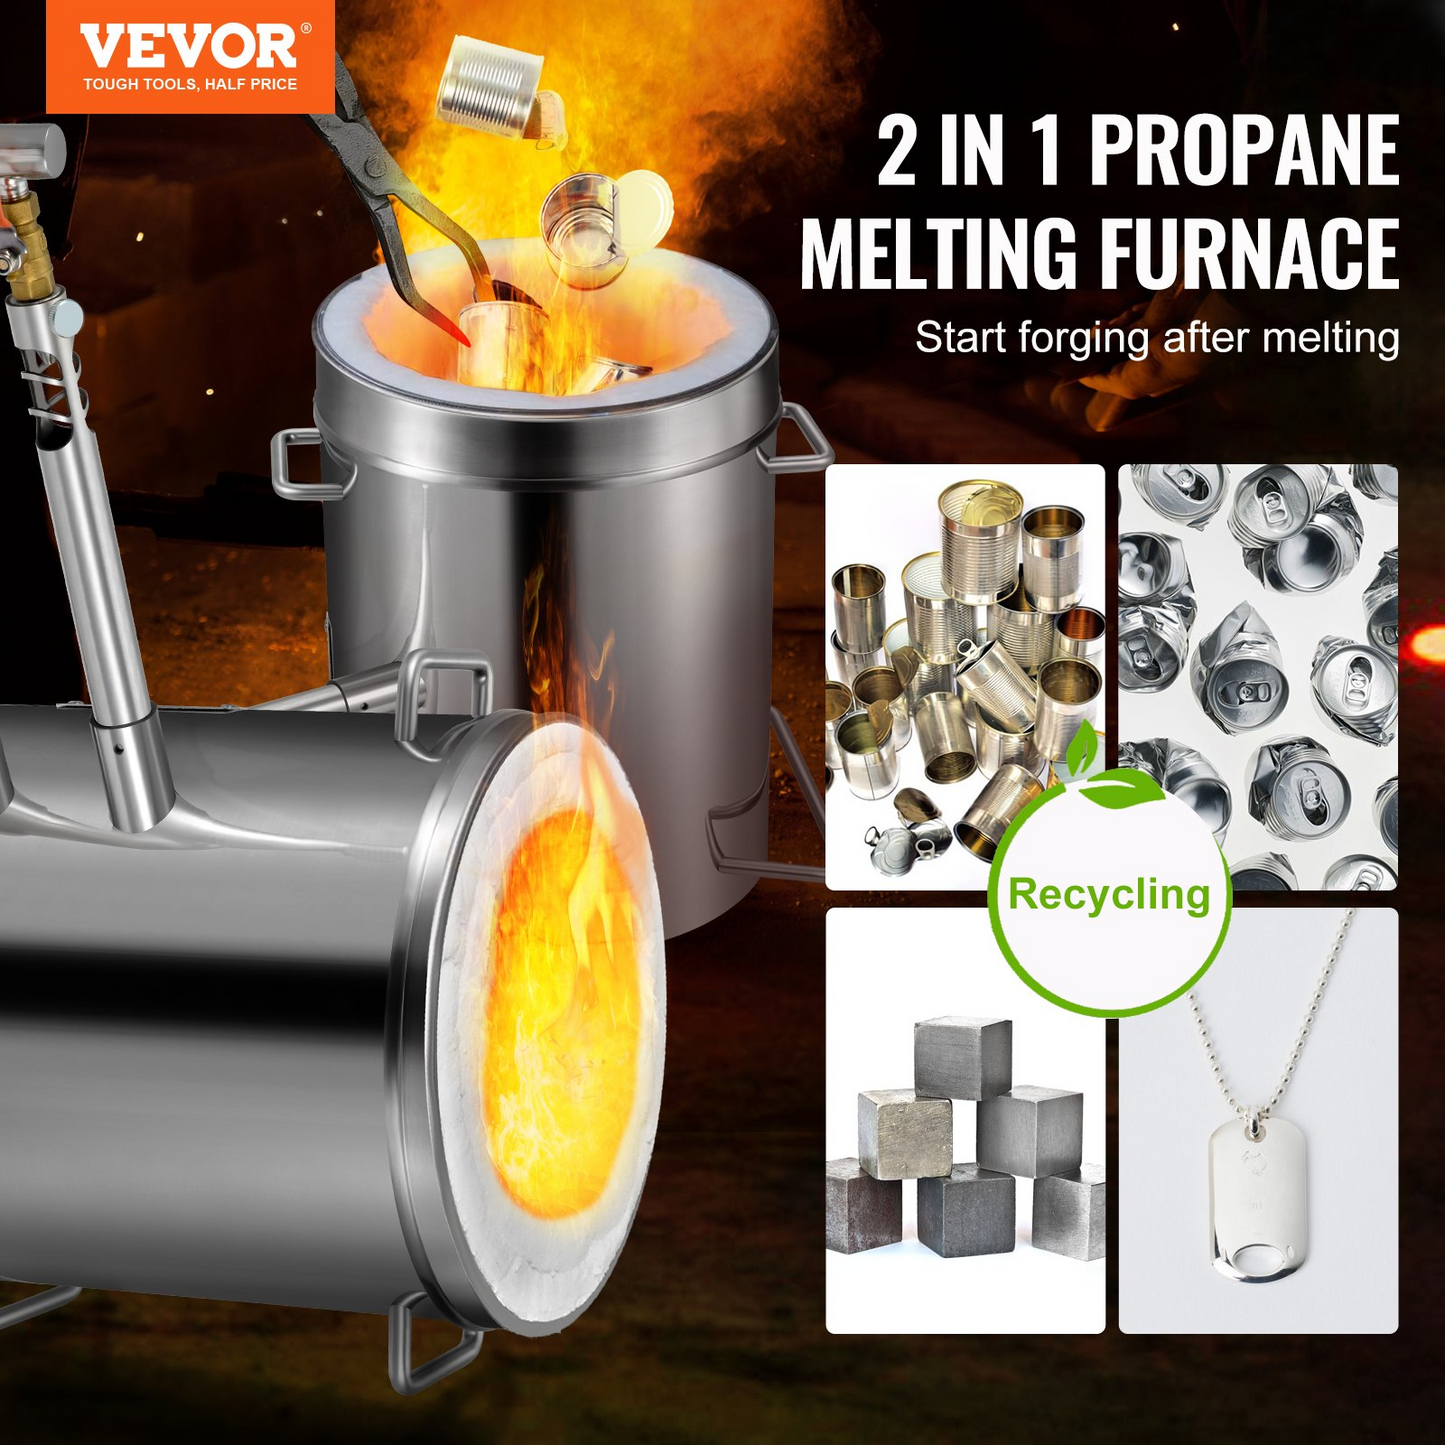 VEVOR Propane Melting Furnace Kit, 12KG Large Capacity Foundry Home Kilns,Stainless Steel Smelter,  Blacksmithing Forge with Crucible an Tongs Kiln, For Metal Scrap Recycle, Gold Copper Silver Casting, Goodies N Stuff